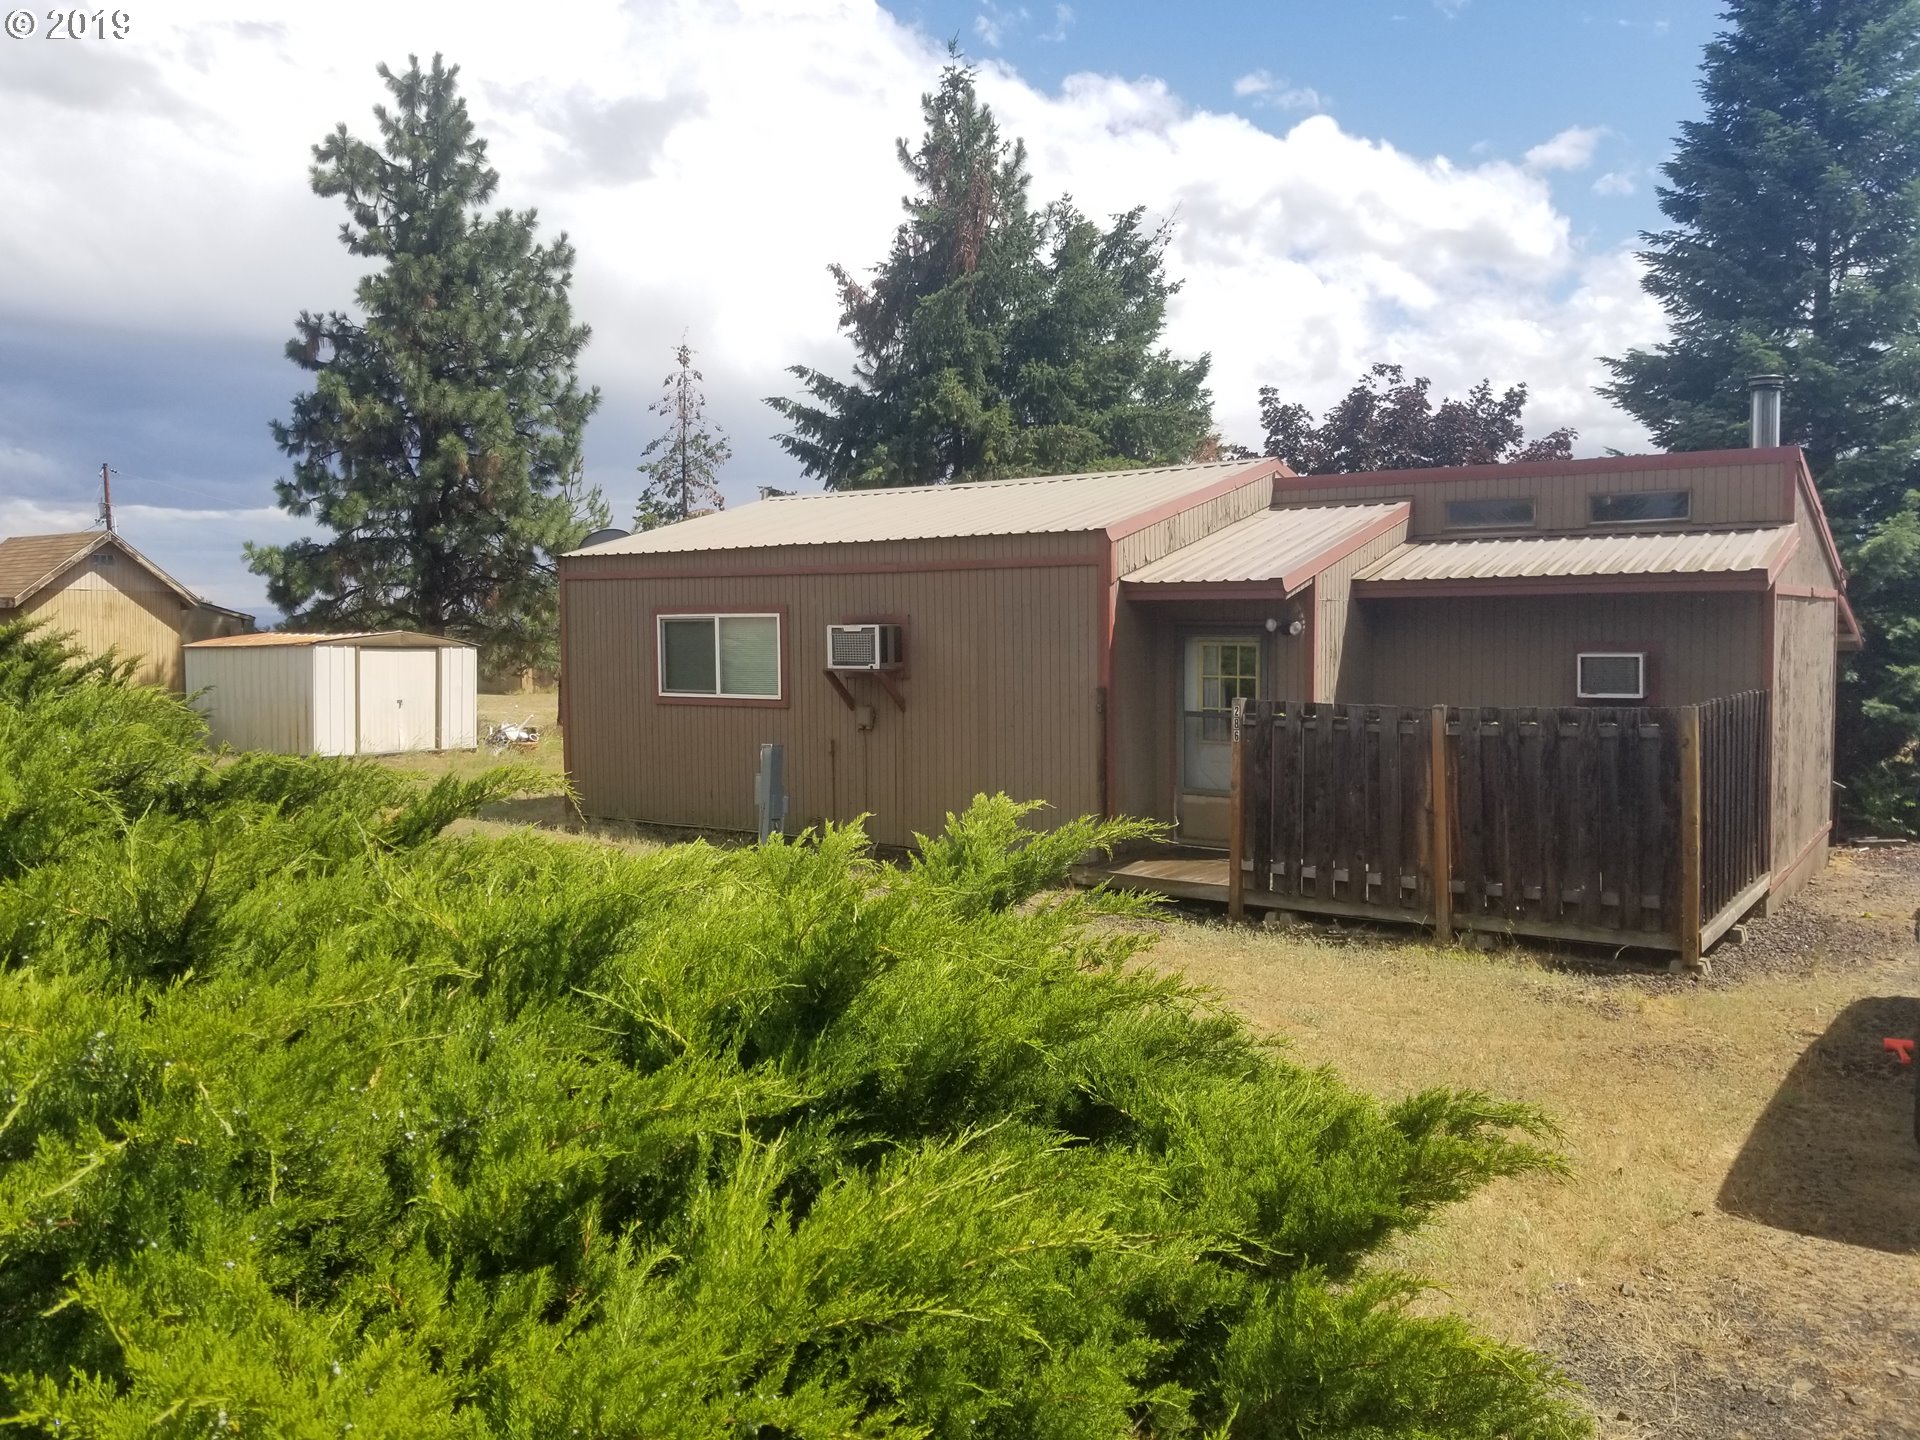 Photo of 286 MOLLY ANN RD Tygh Valley OR 97063